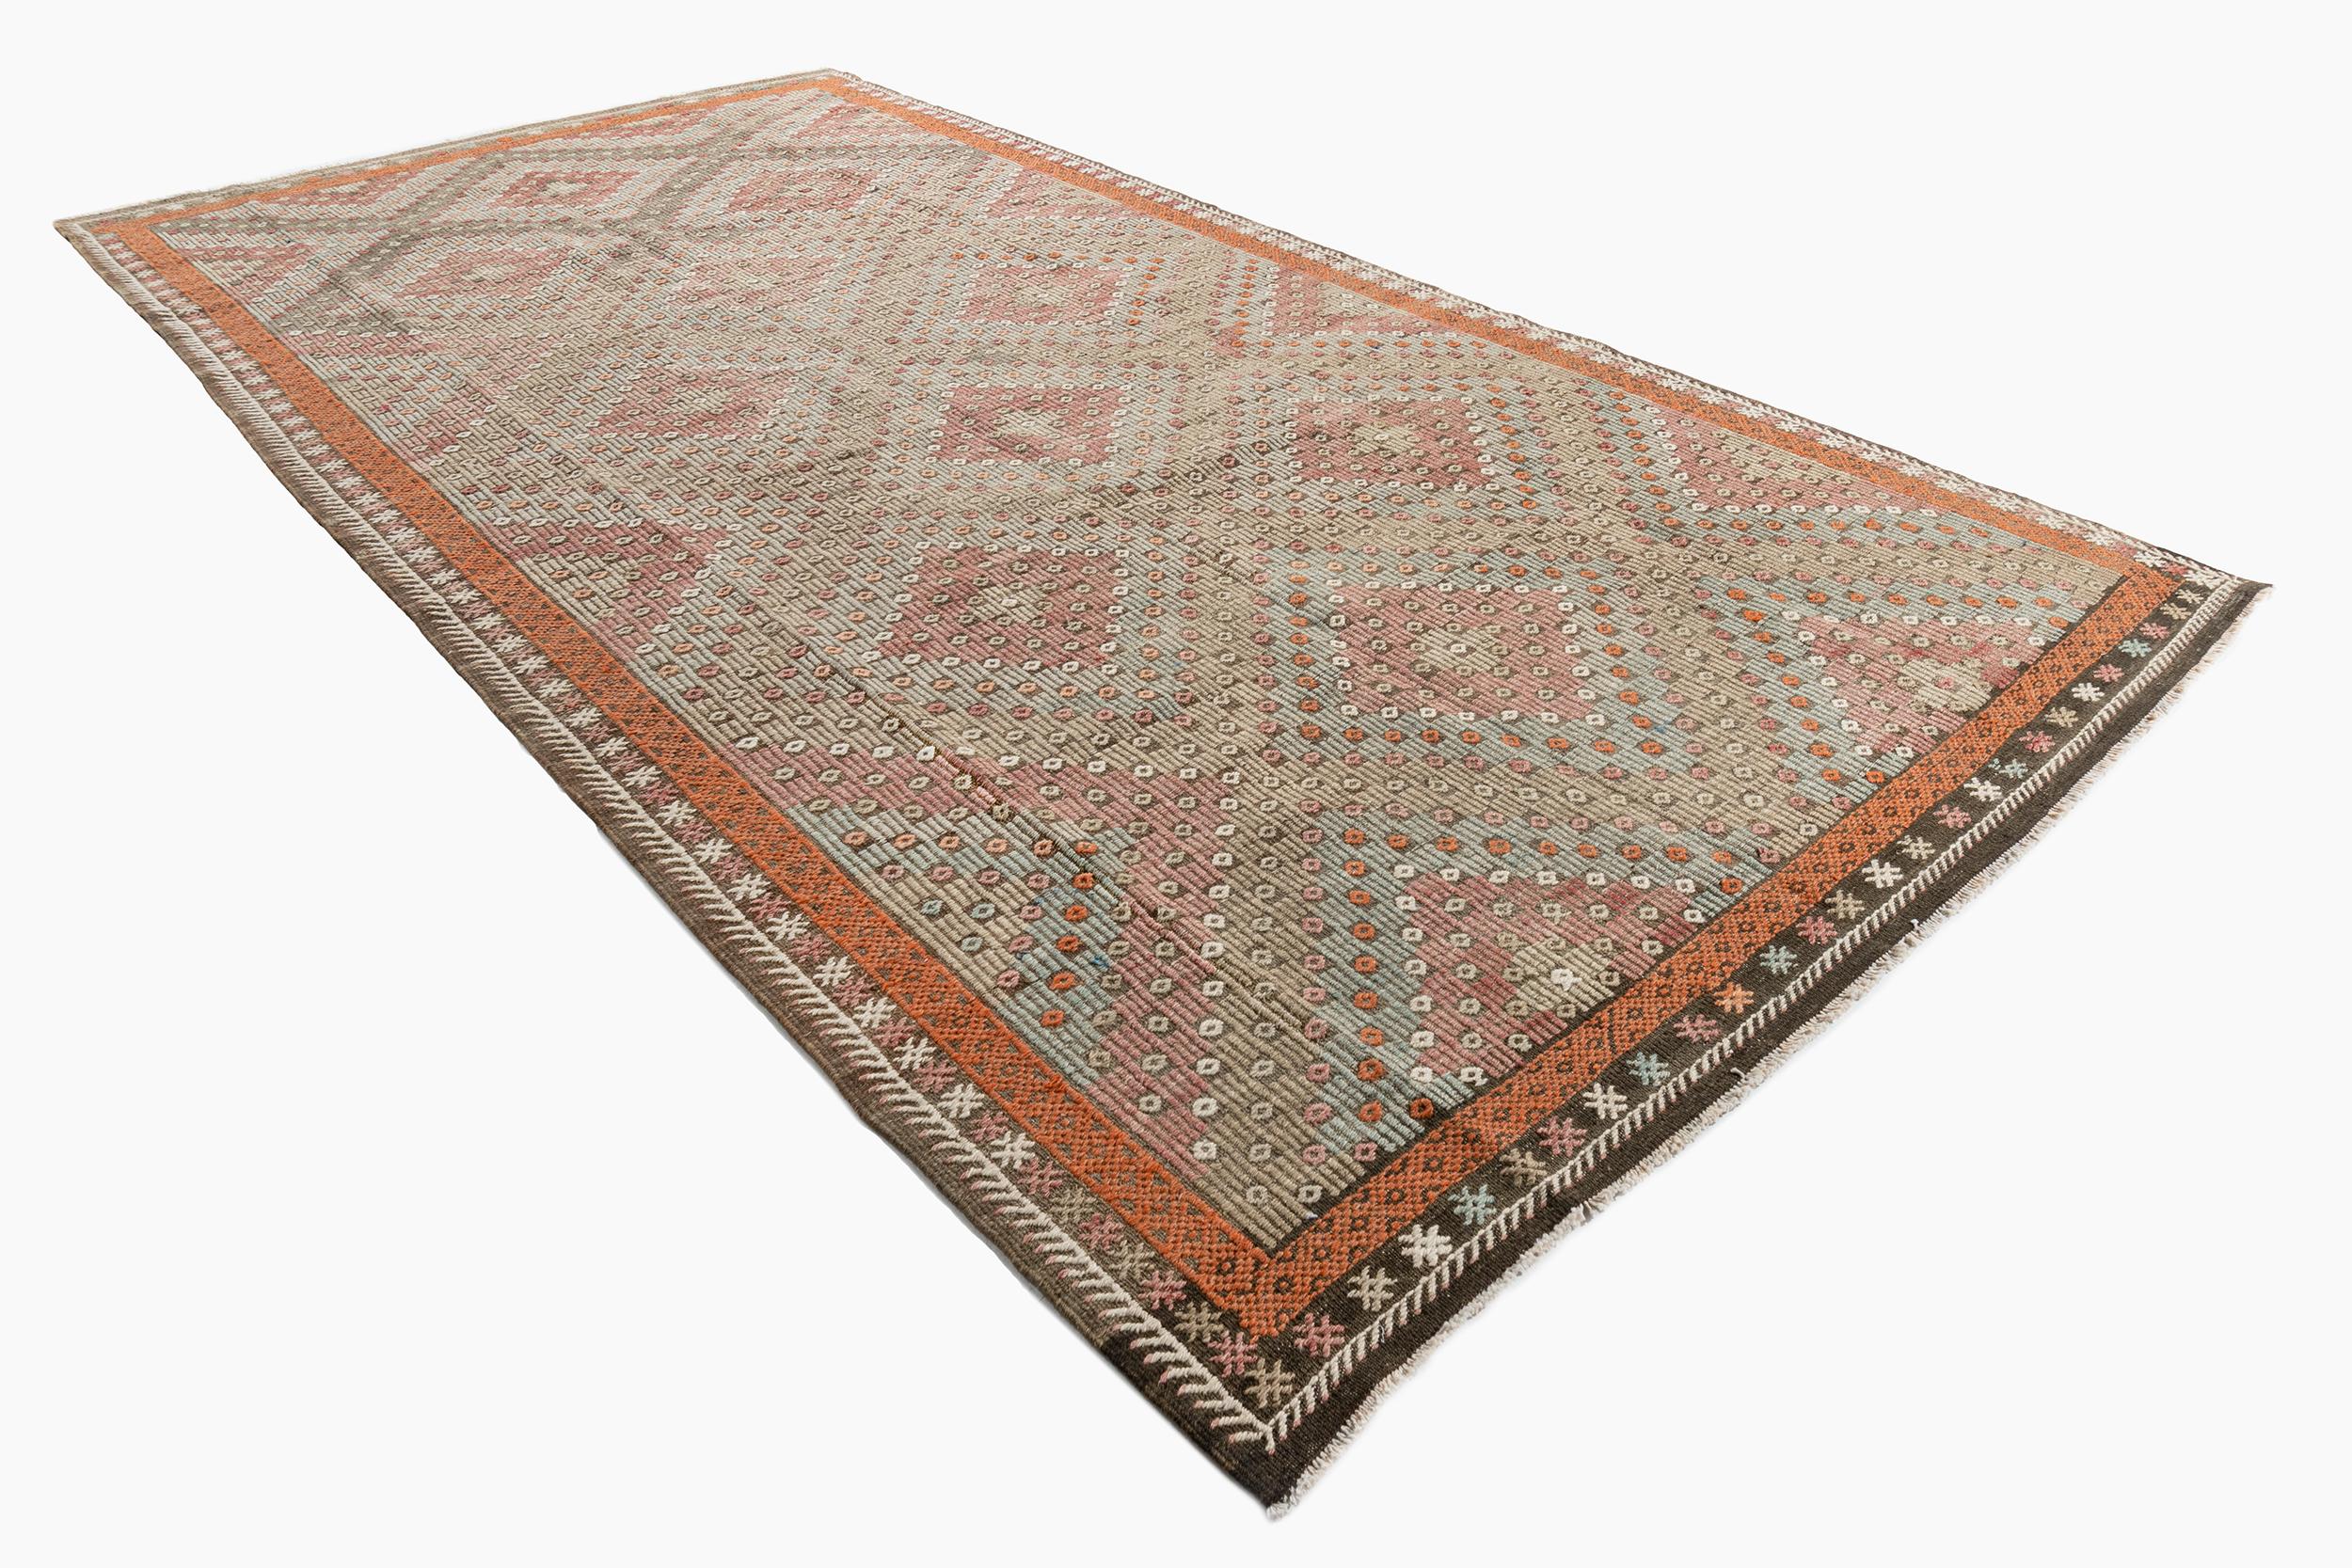 Vintage Turkish Kilim Rug Runner 6'2 X 12'. This vintage Turkish flat weave Kilim was hand-woven in the 1940's. The simplicity and boldness of this piece can also give a contemporary feel and is able to look at home in both a modern and traditional